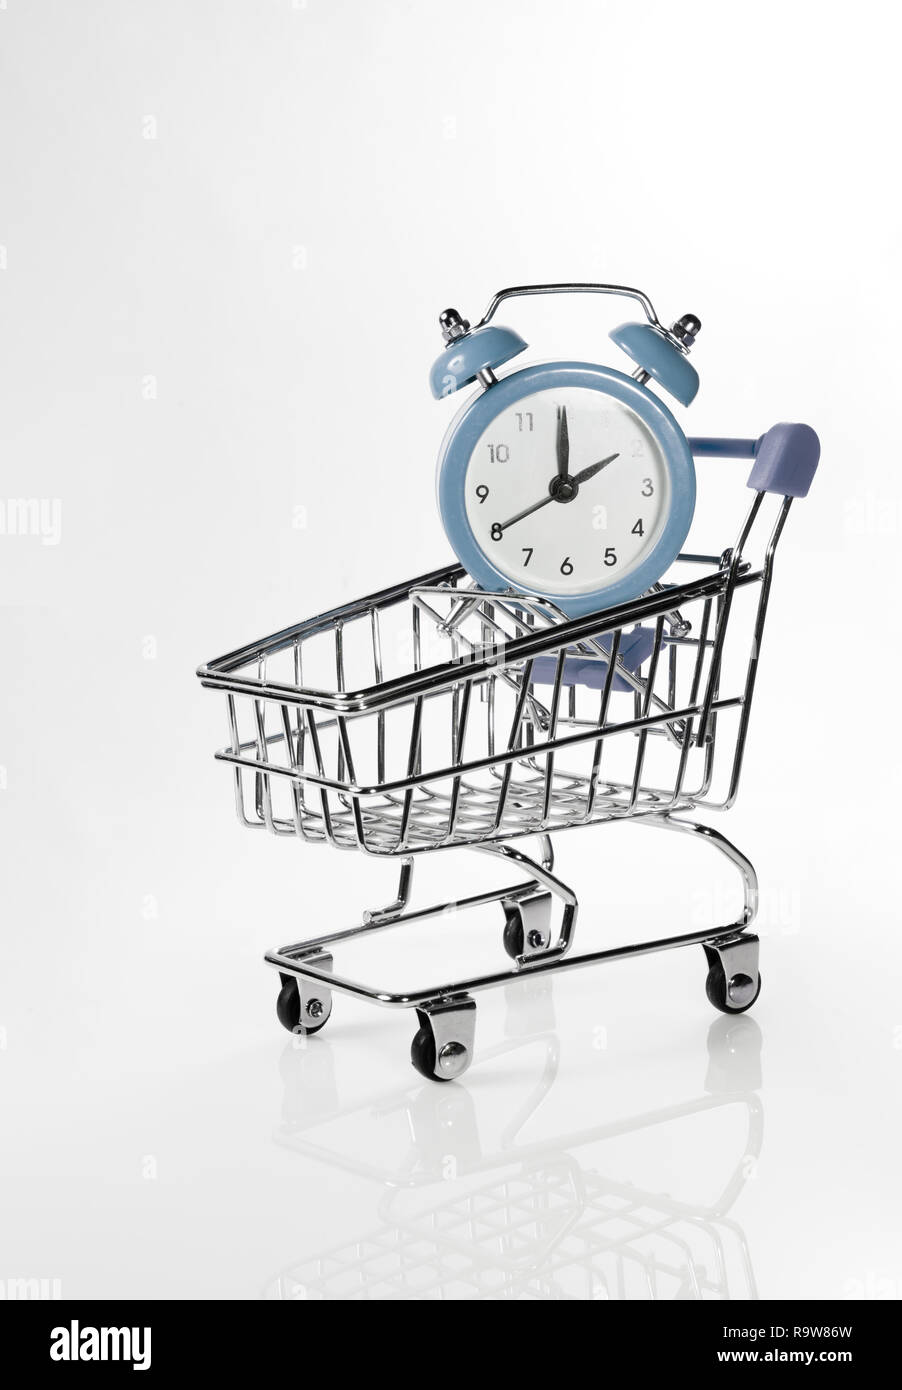 Alarm clock in a shopping trolley on a white background. Stock Photo